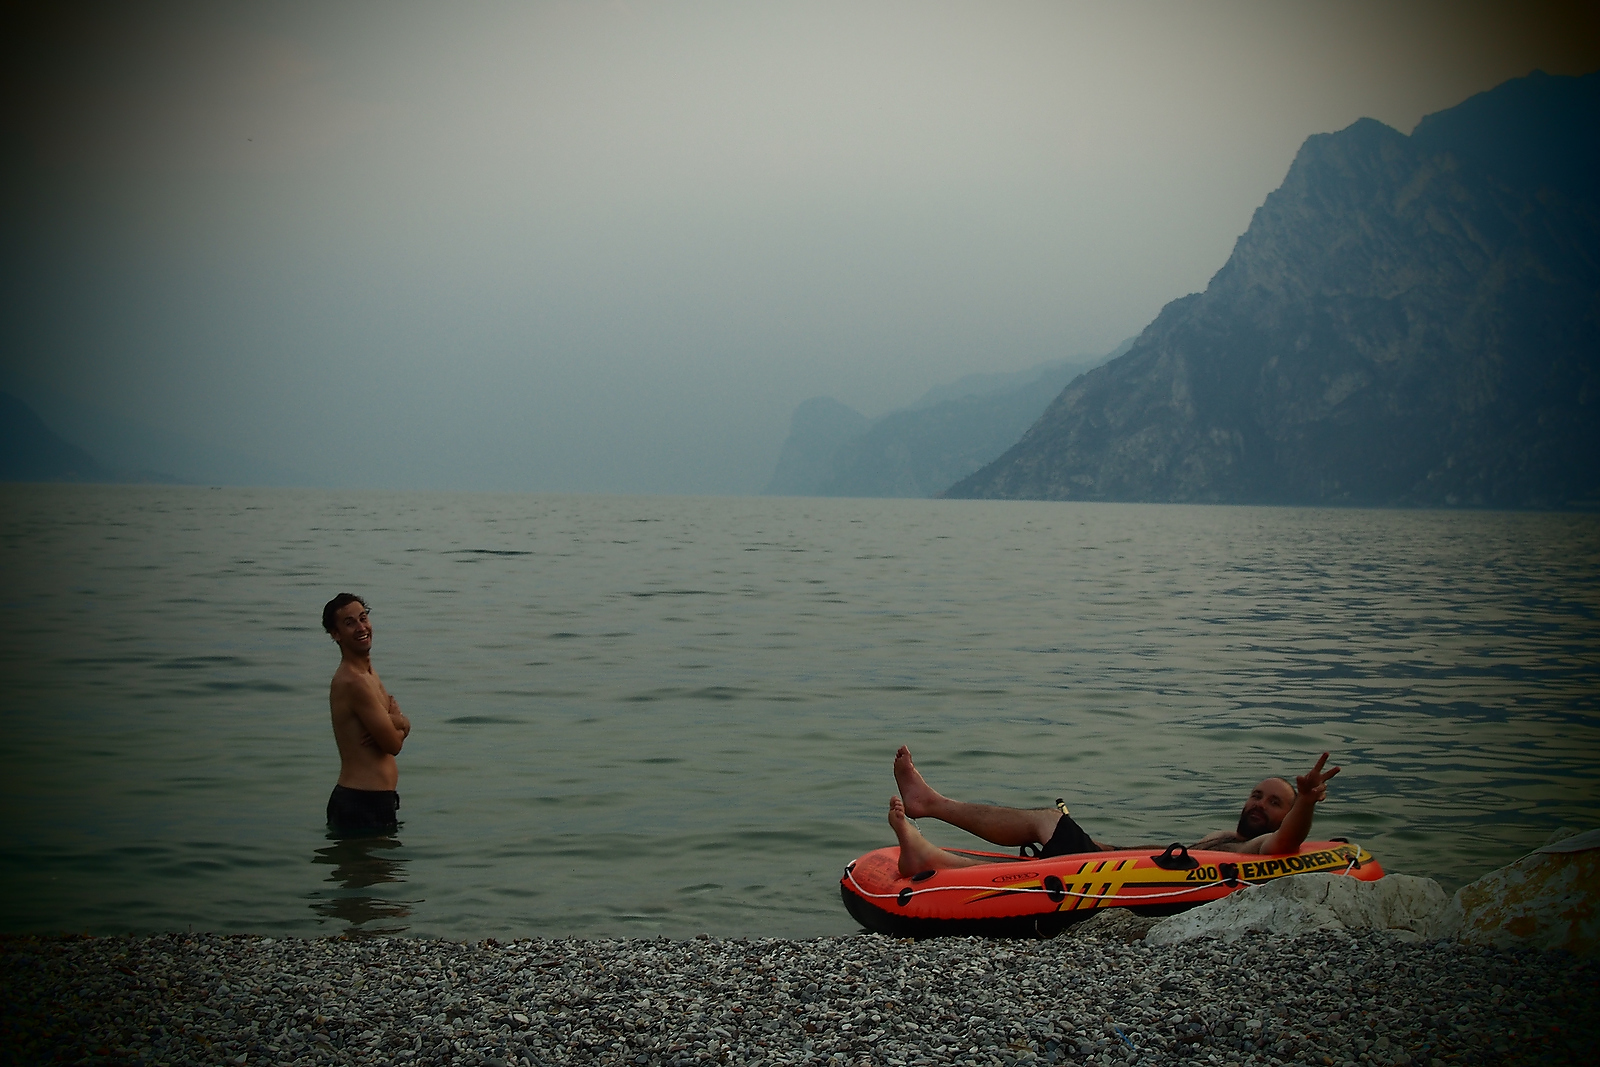 Sven & Andy lounging in the  lake.